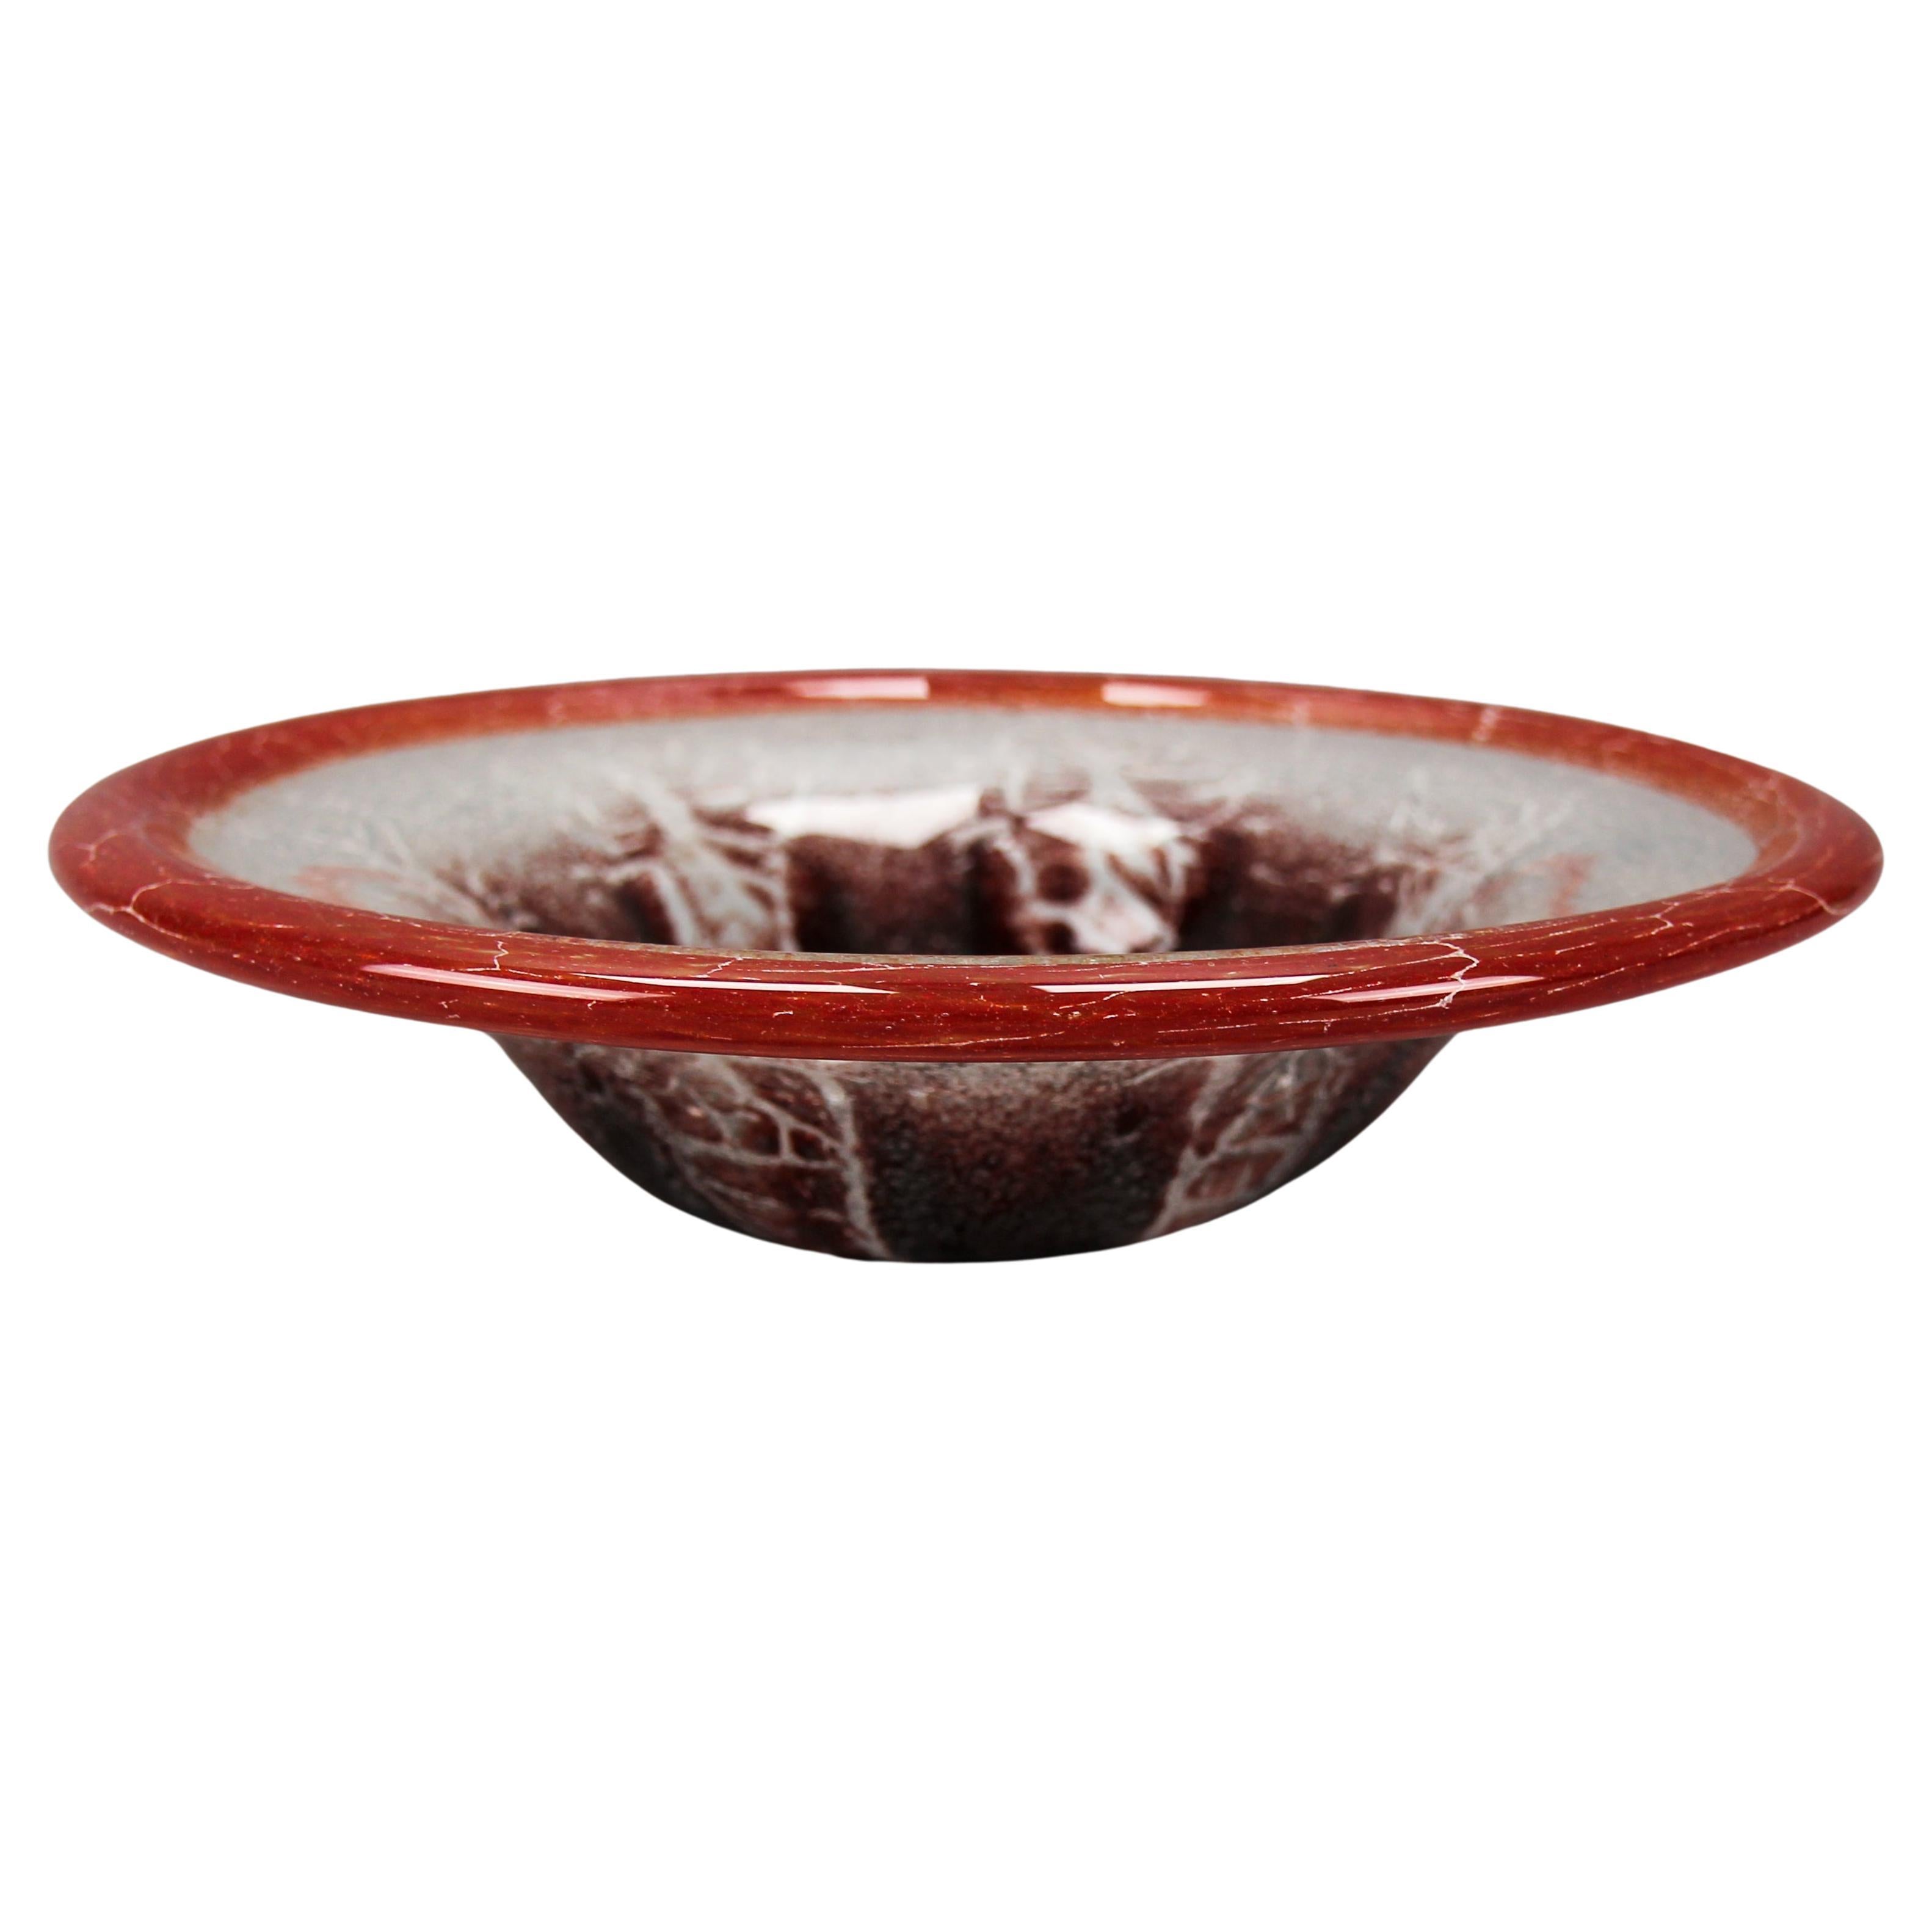 German Ikora Art Glass Bowl in Red, White and Burgundy by WMF, ca. 1930s For Sale